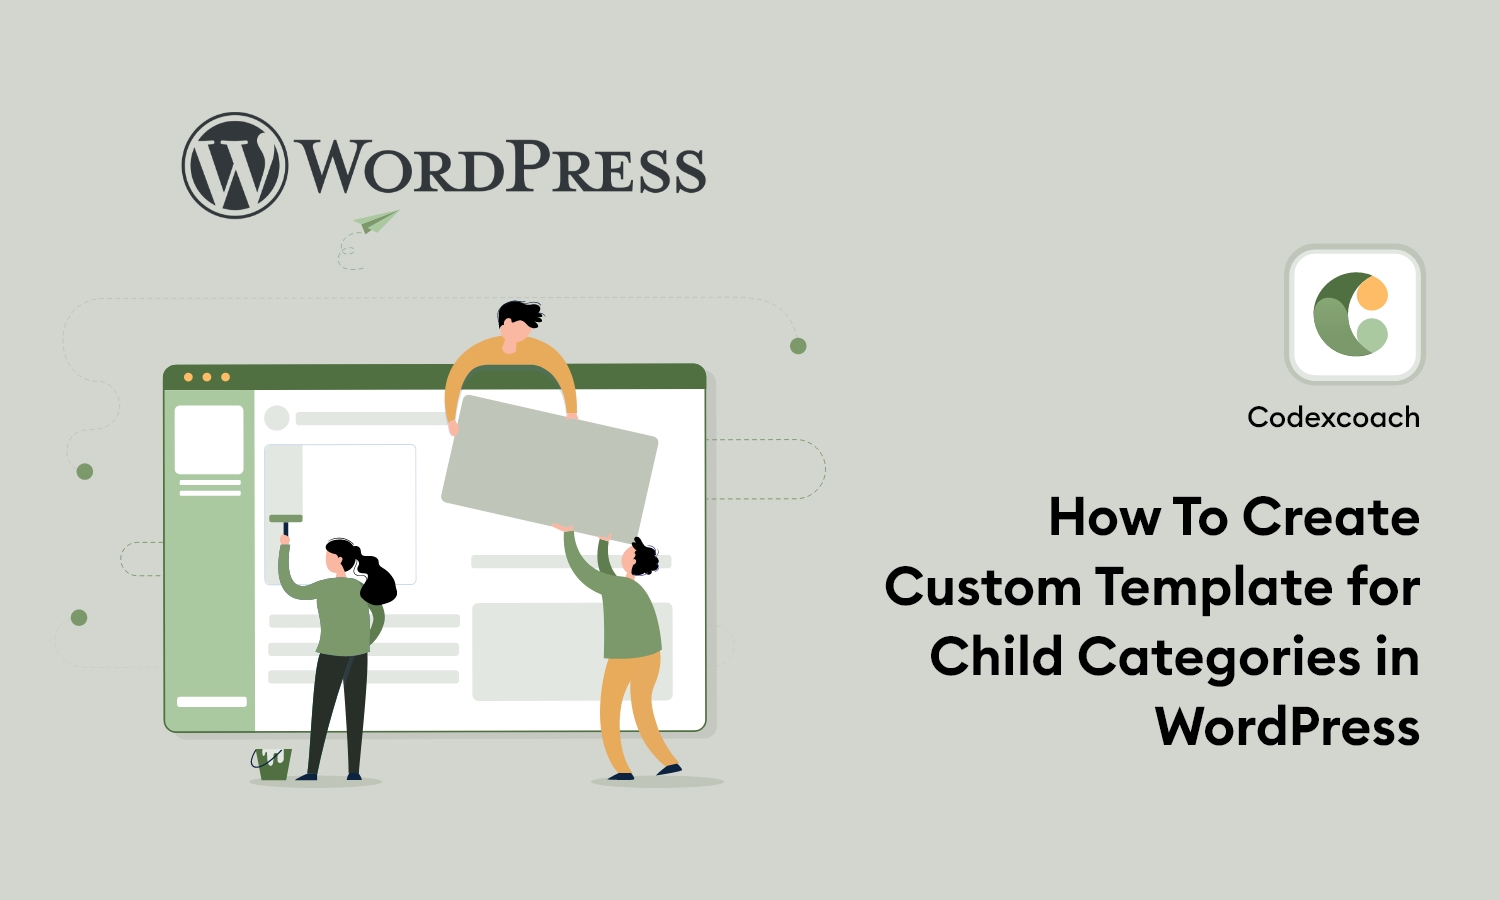 How To Create Custom Template for Child Categories in WordPress